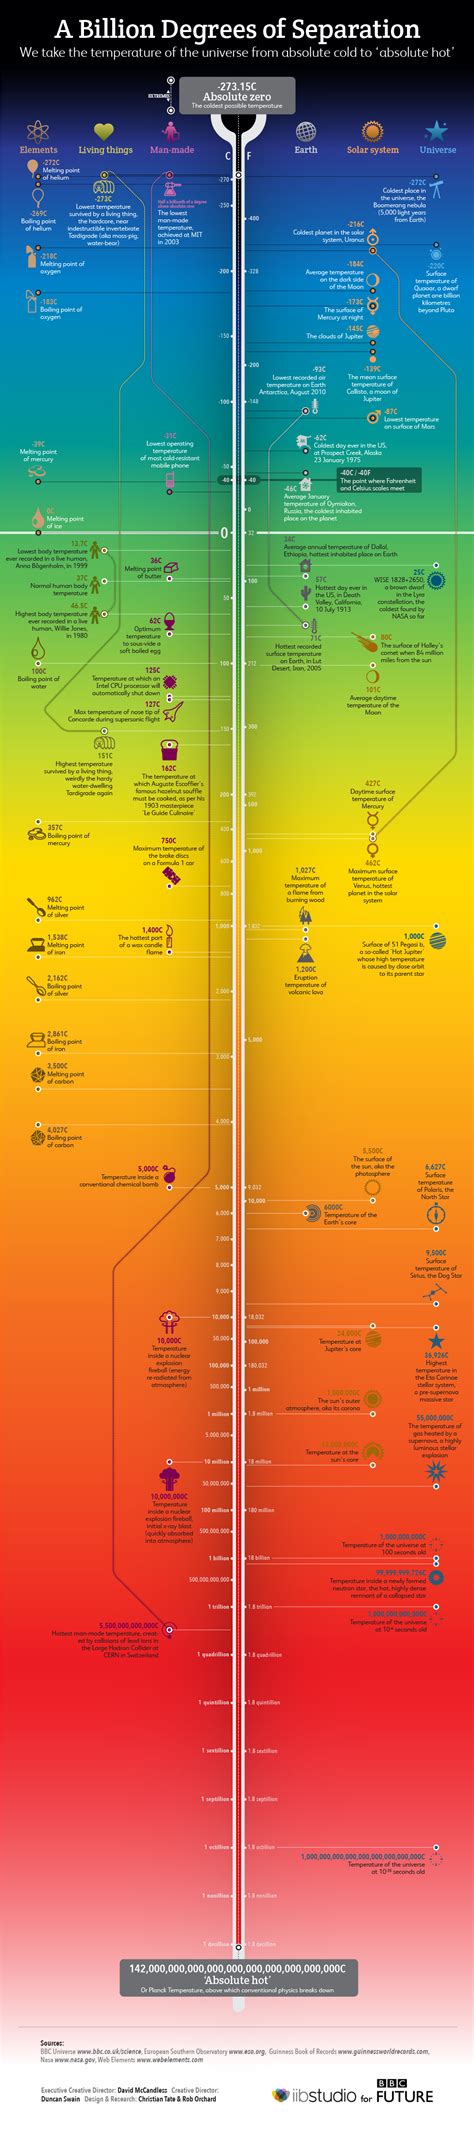 BBC - Future - Infographic: Absolute zero to ‘absolute hot’